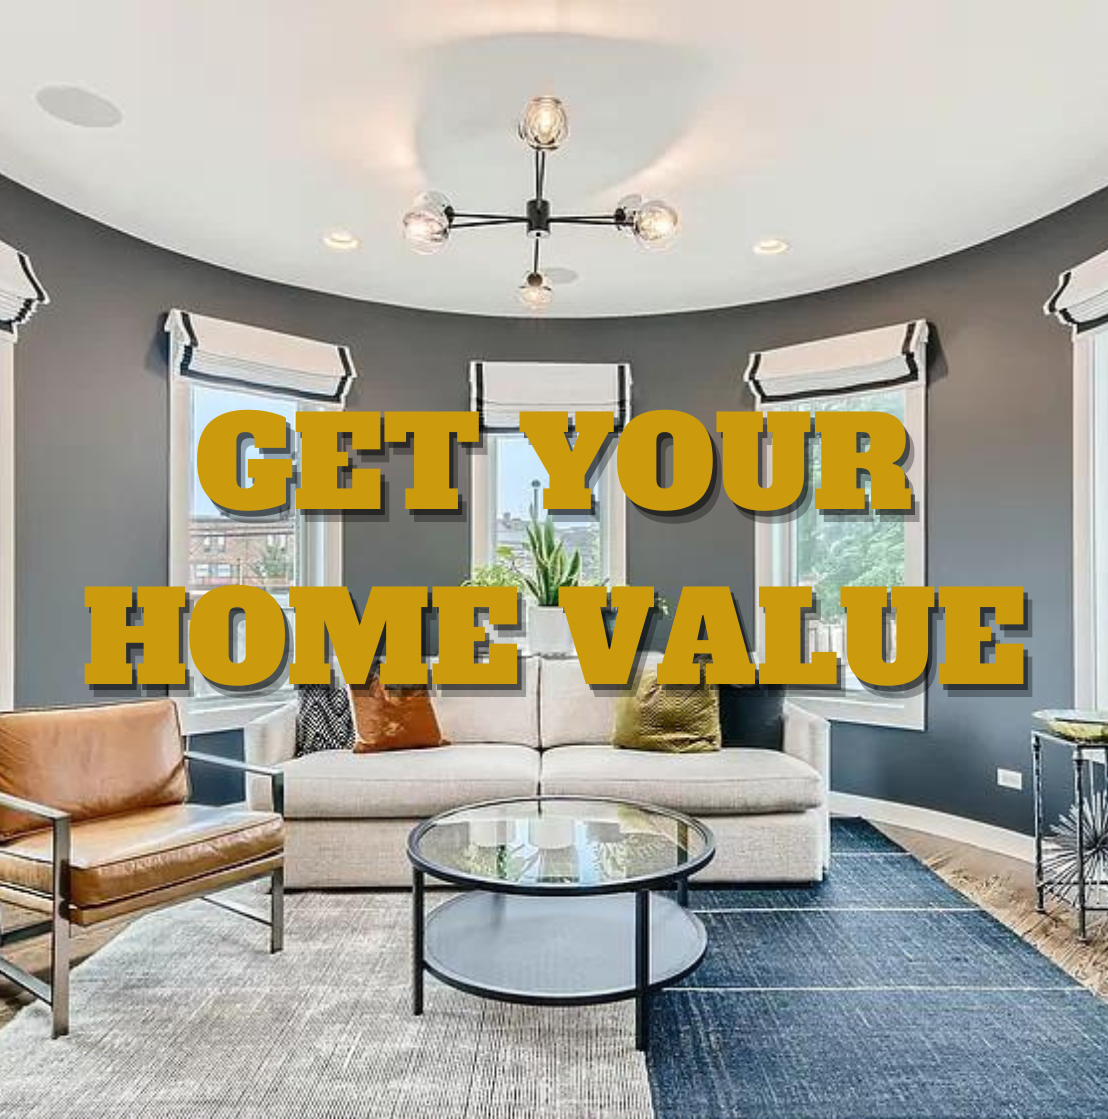 Get Your Home Value